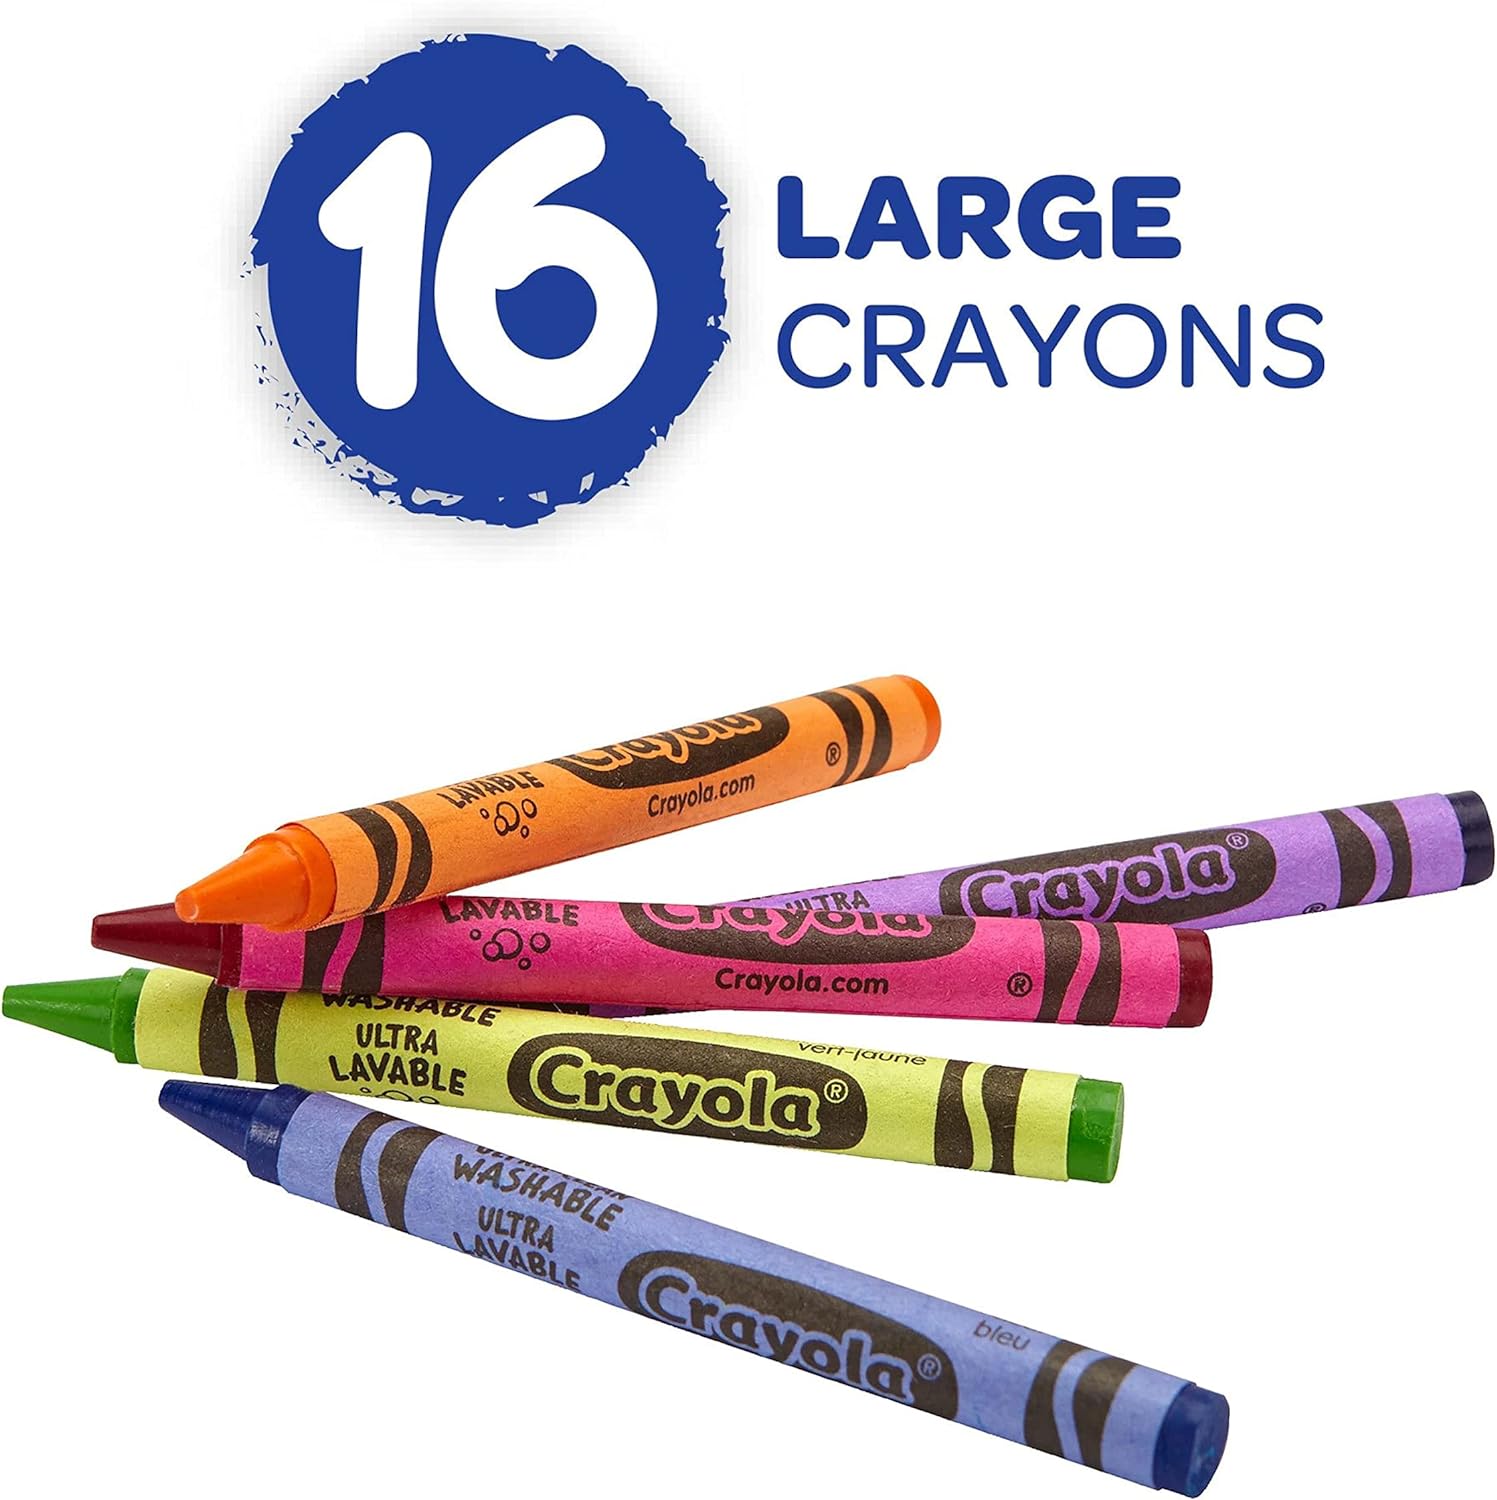 Crayola Ultra-Clean Washable Crayons Pack of 16 523281